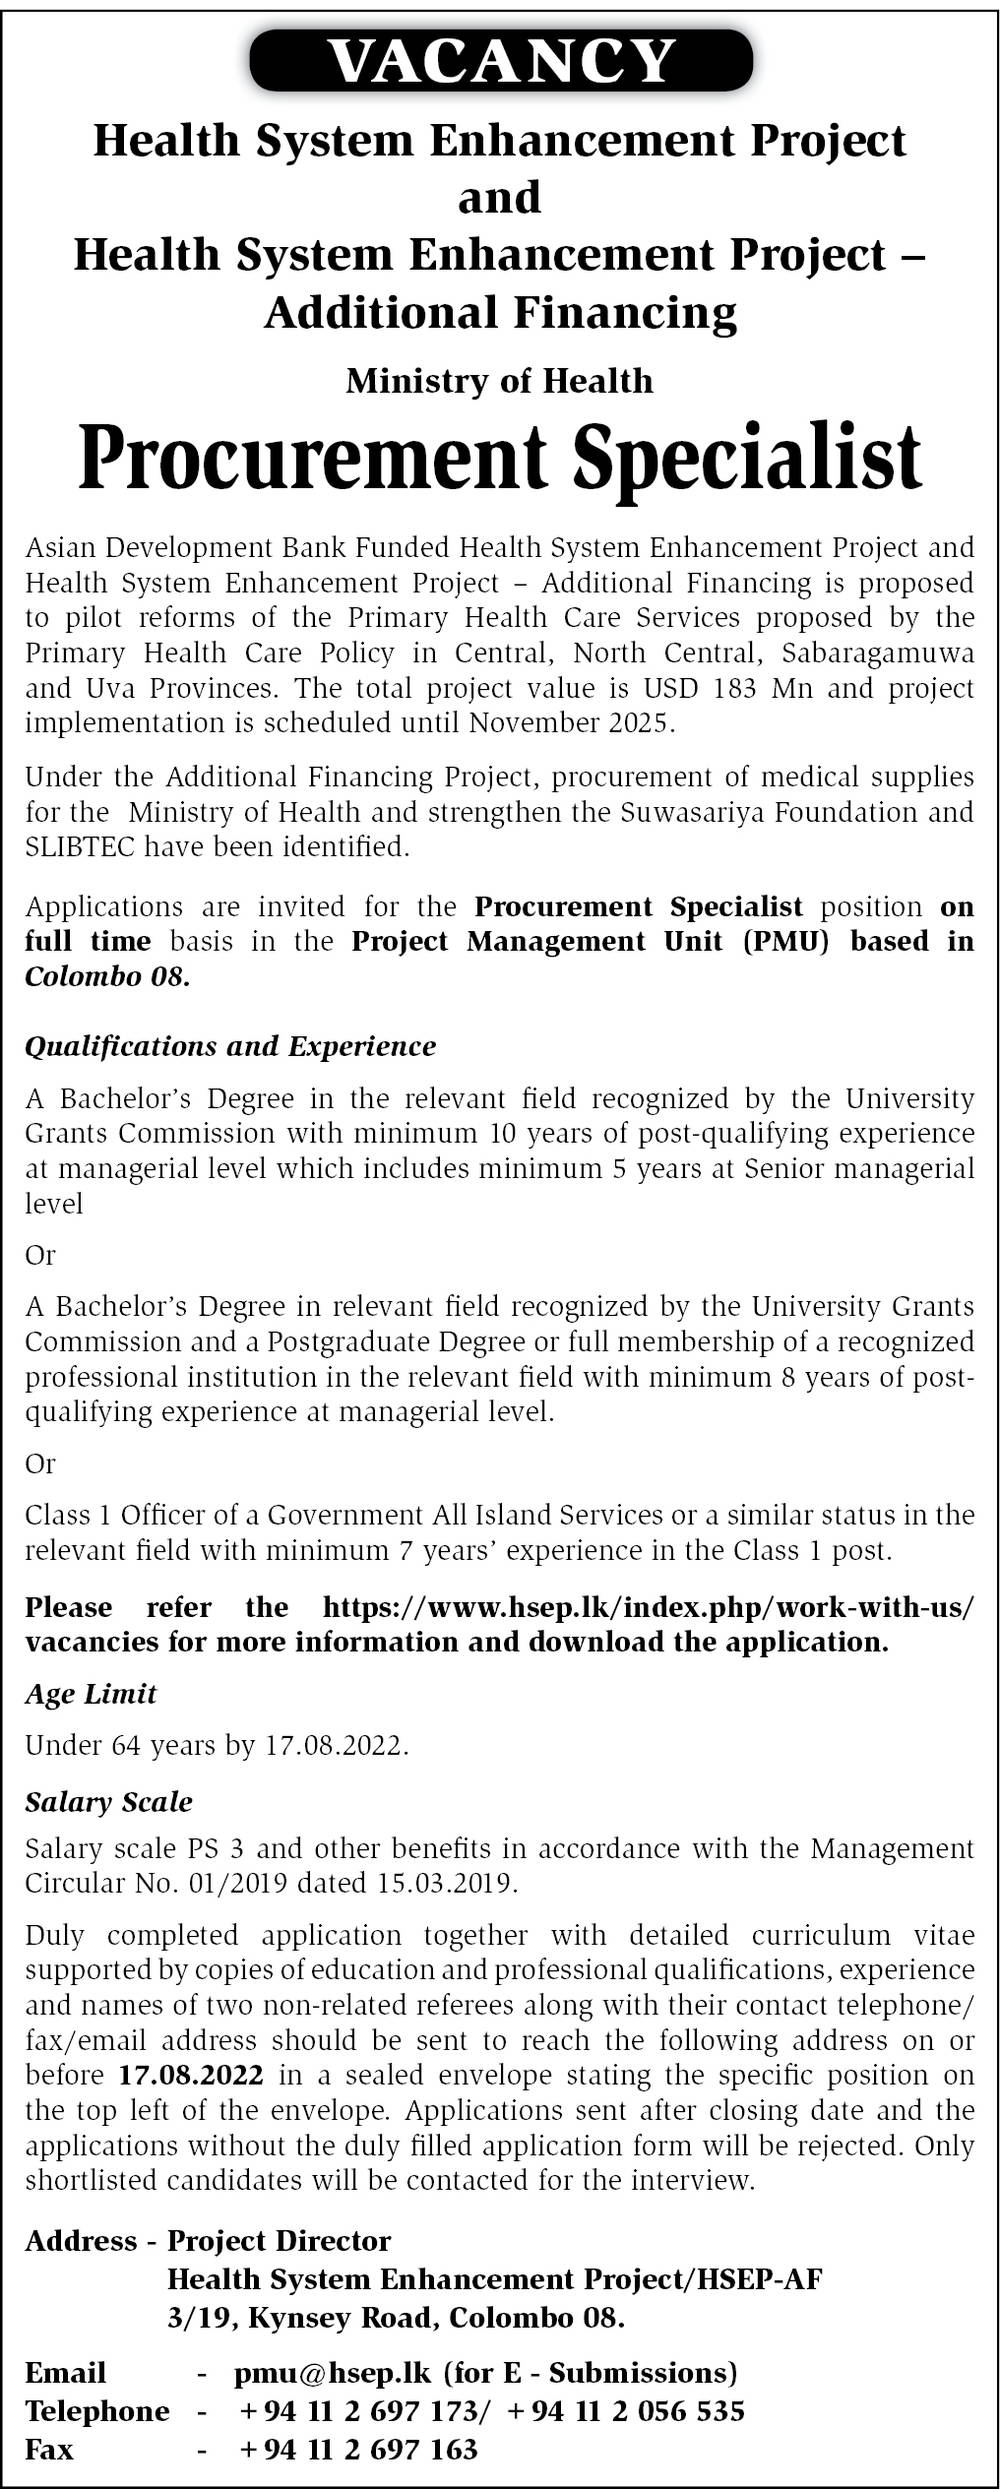 Procurement Specialist - Ministry of Health